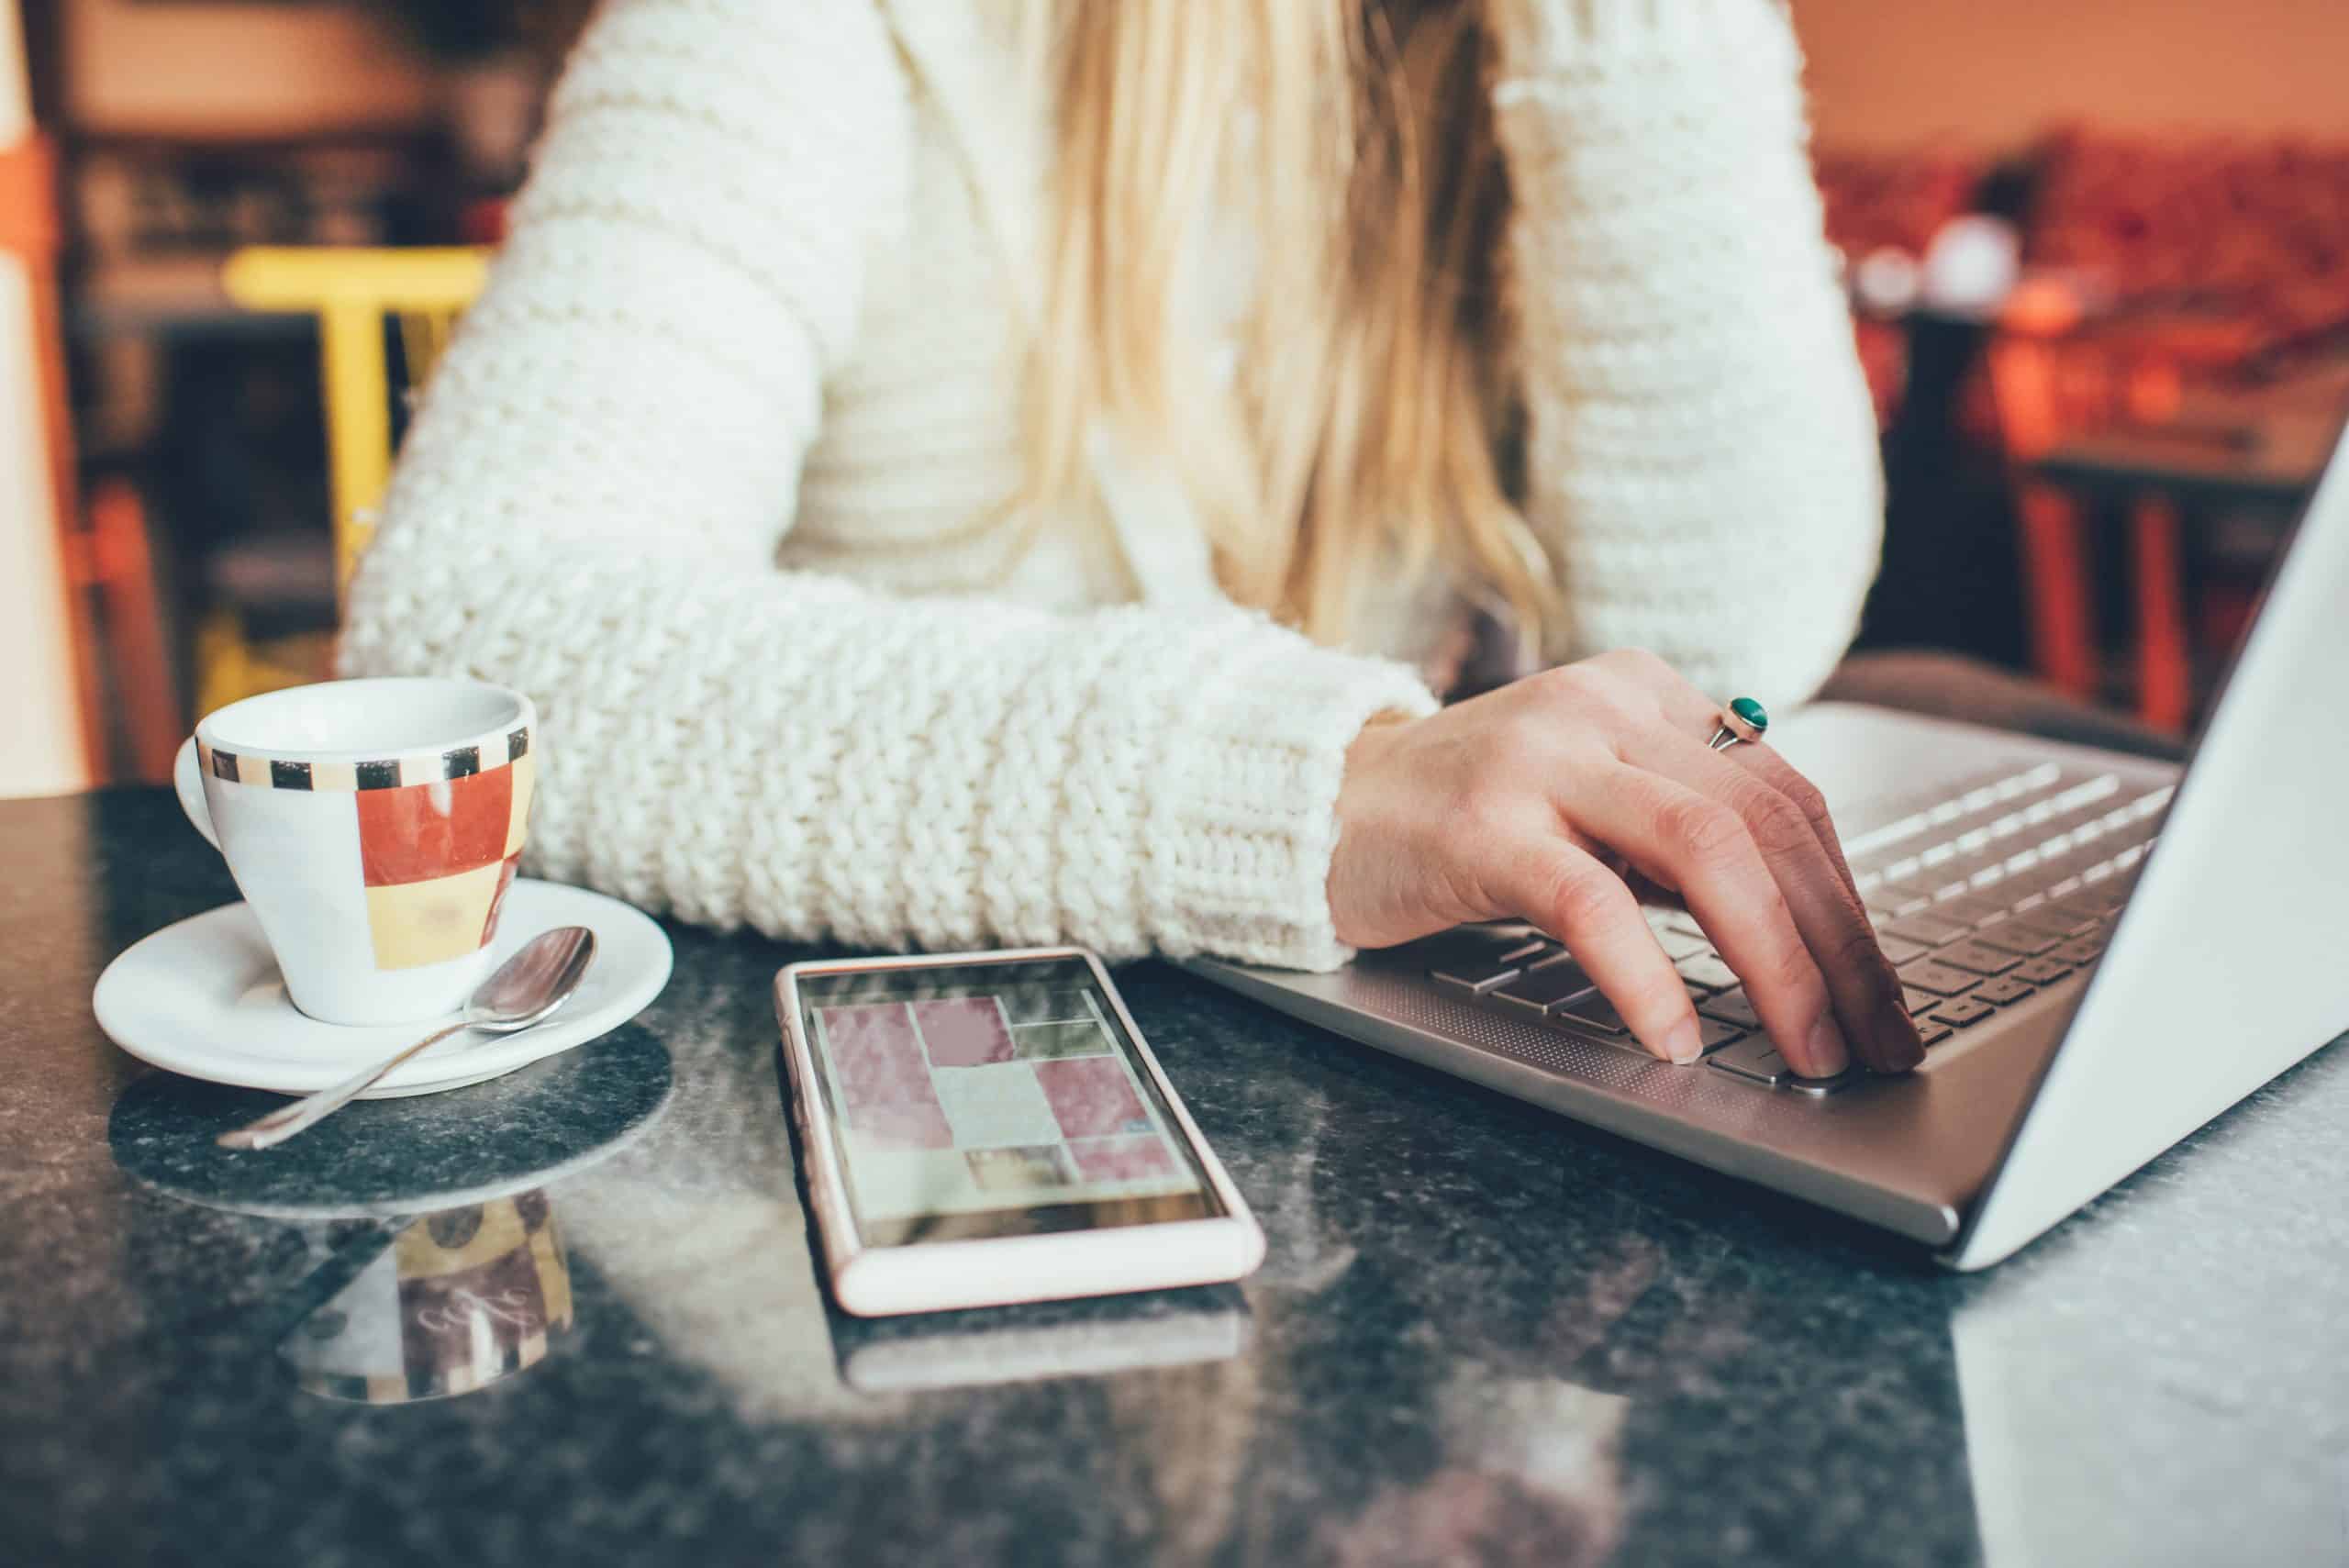 Close up on the hand of a young woman sitting on a bar having a coffee, using smart phone and tapping pc keyboard - leisure, technology, social network concept